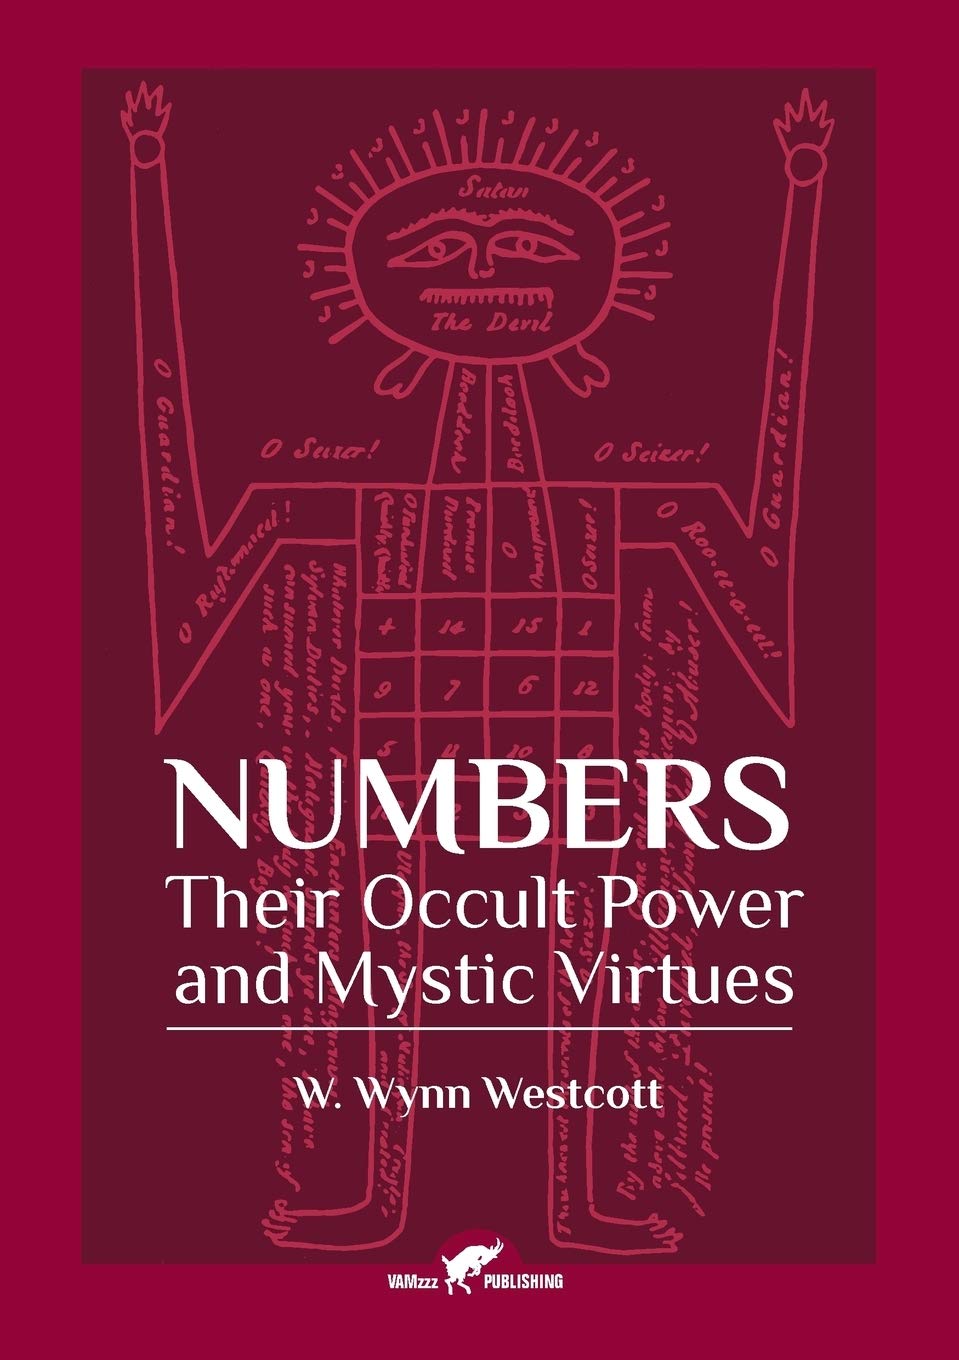 Numbers: Their Occult Power and Mystic Virtues, by W. Wynn Westcott